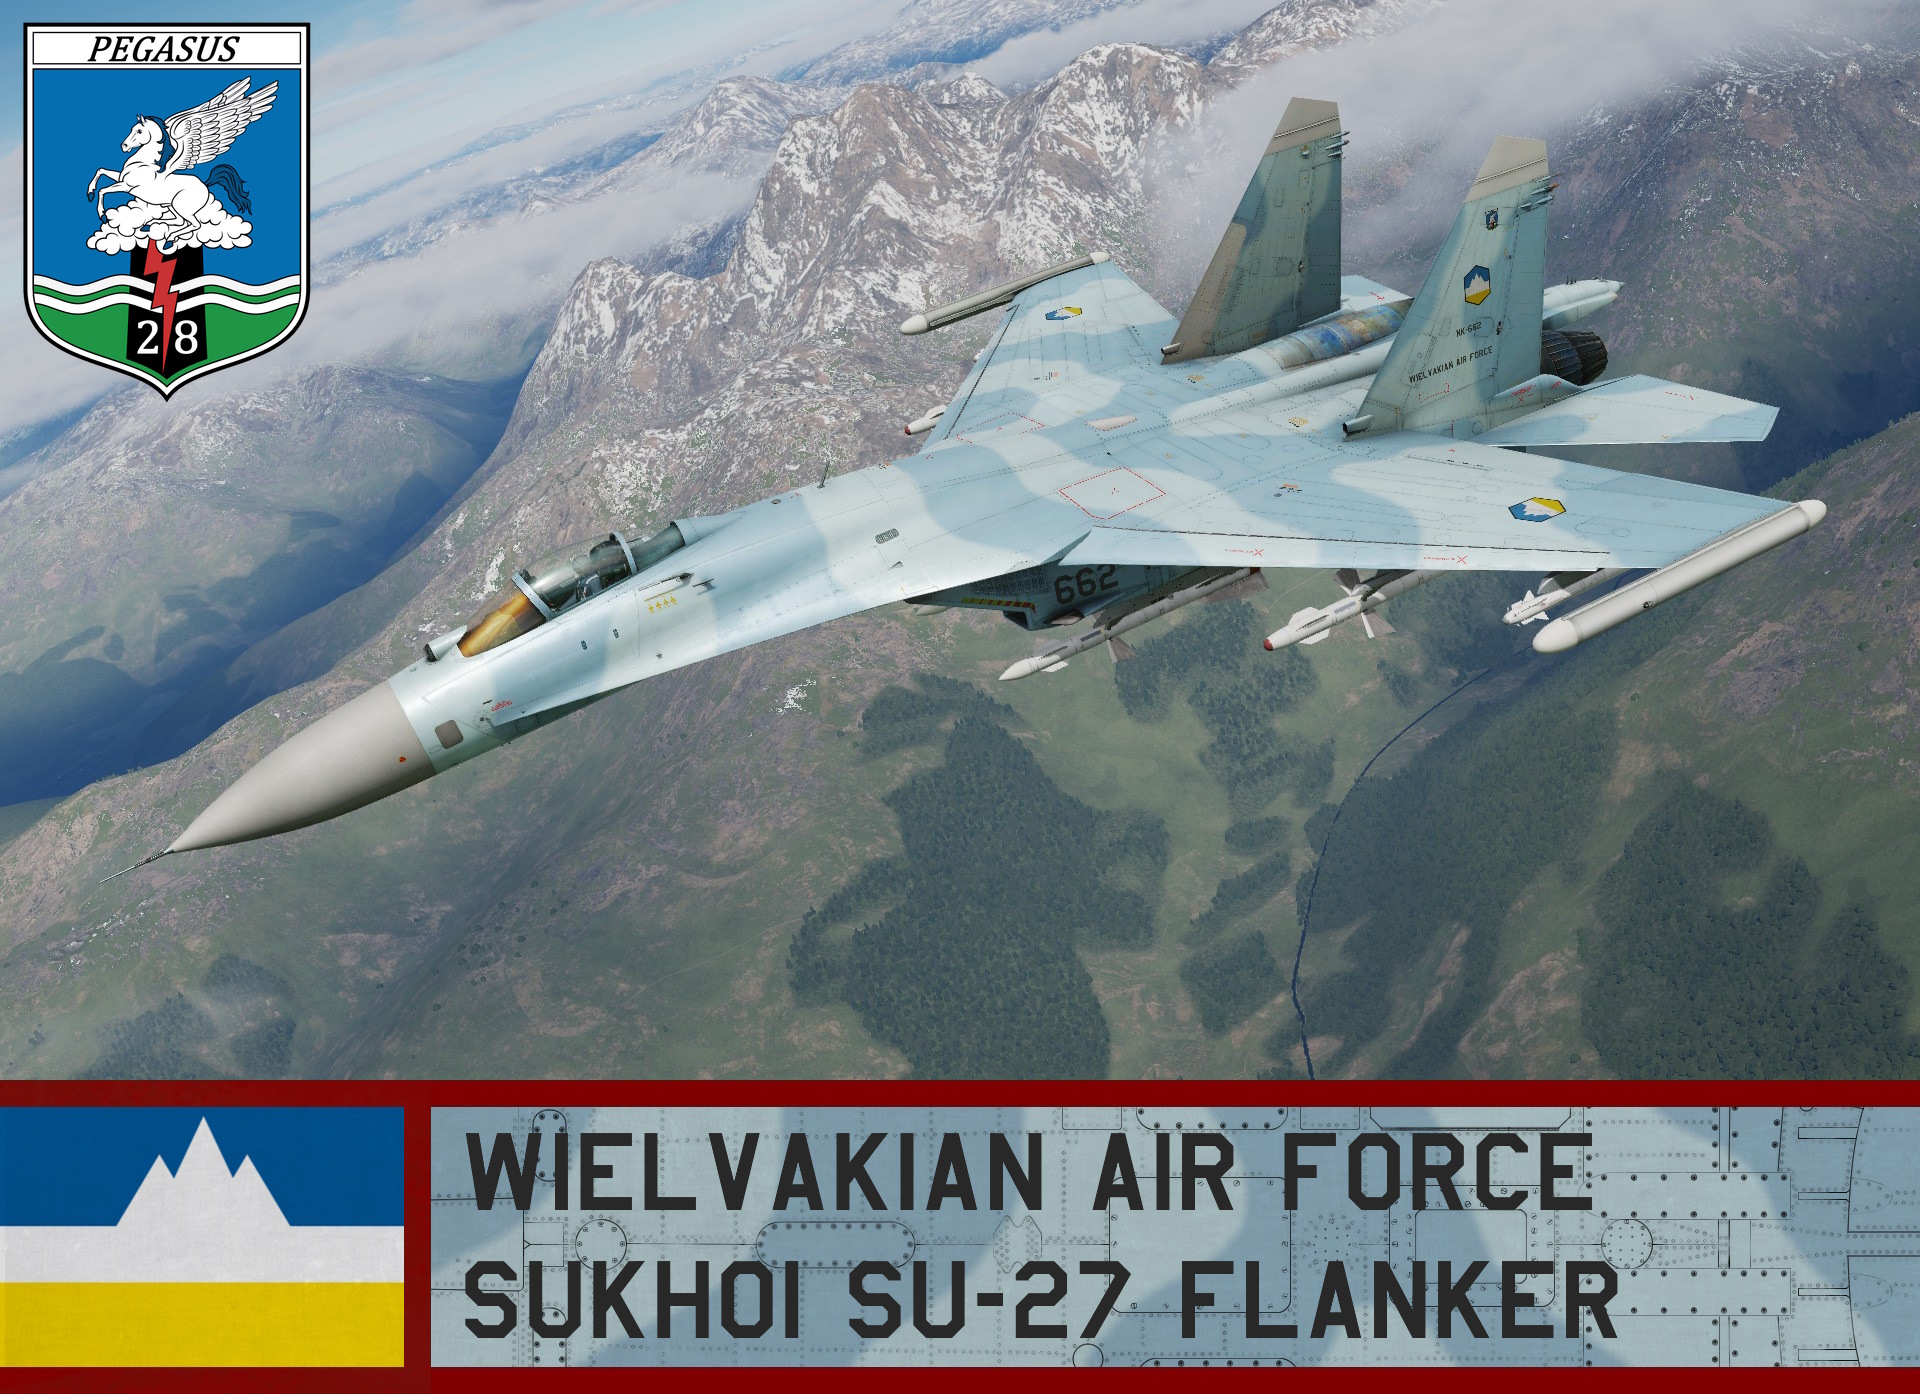 Wielvakian Air Force, SU-27 Flanker - Ace Combat